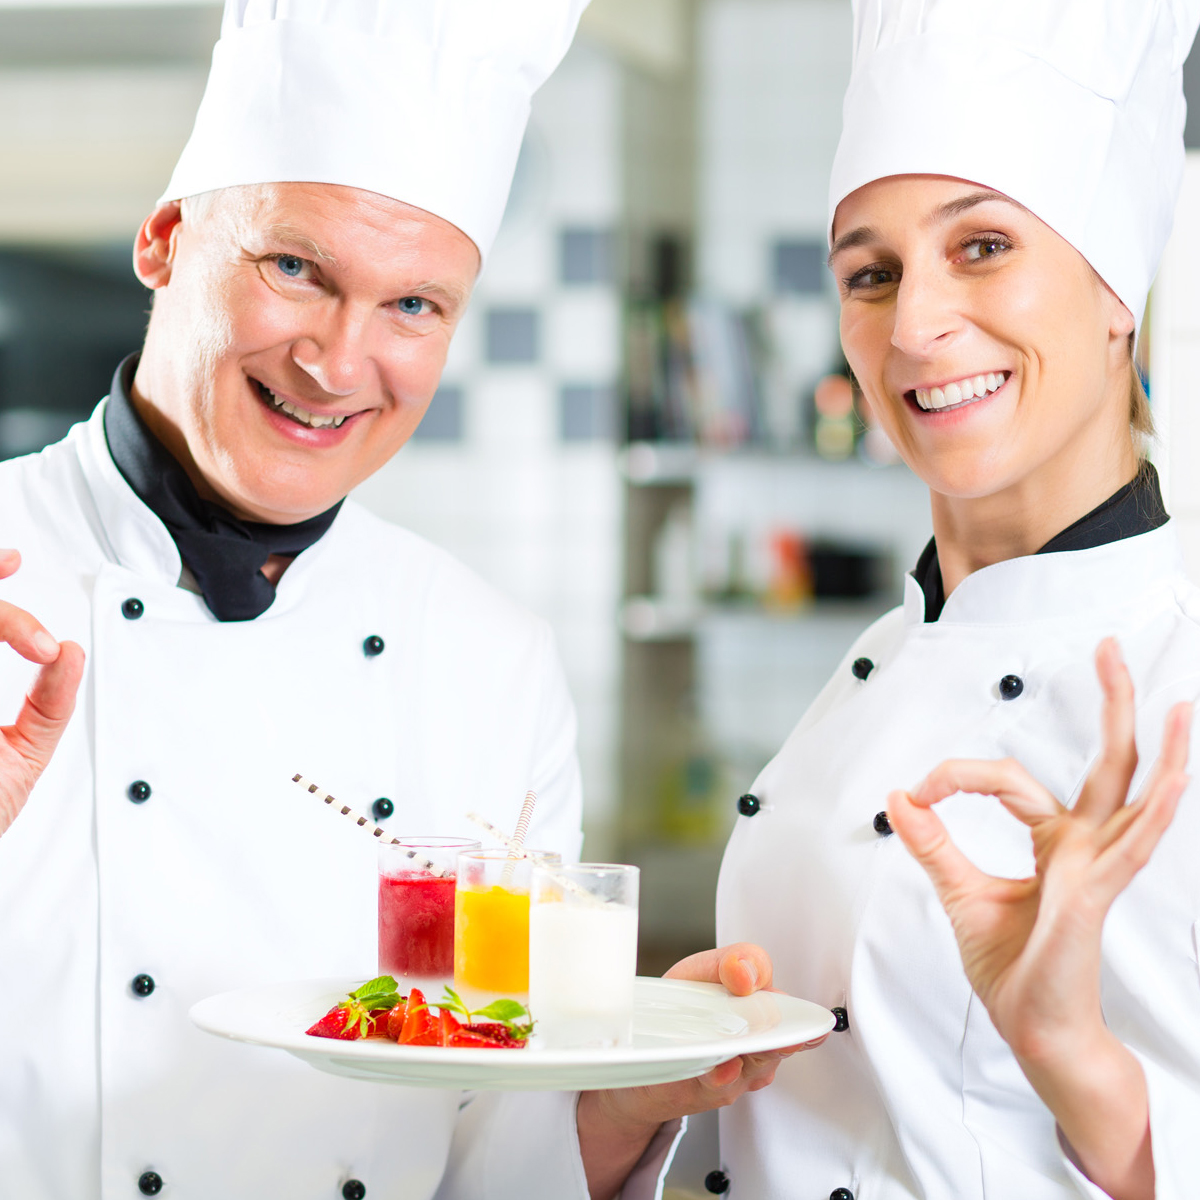 two chefs giving the OK sign holding fruit shooters